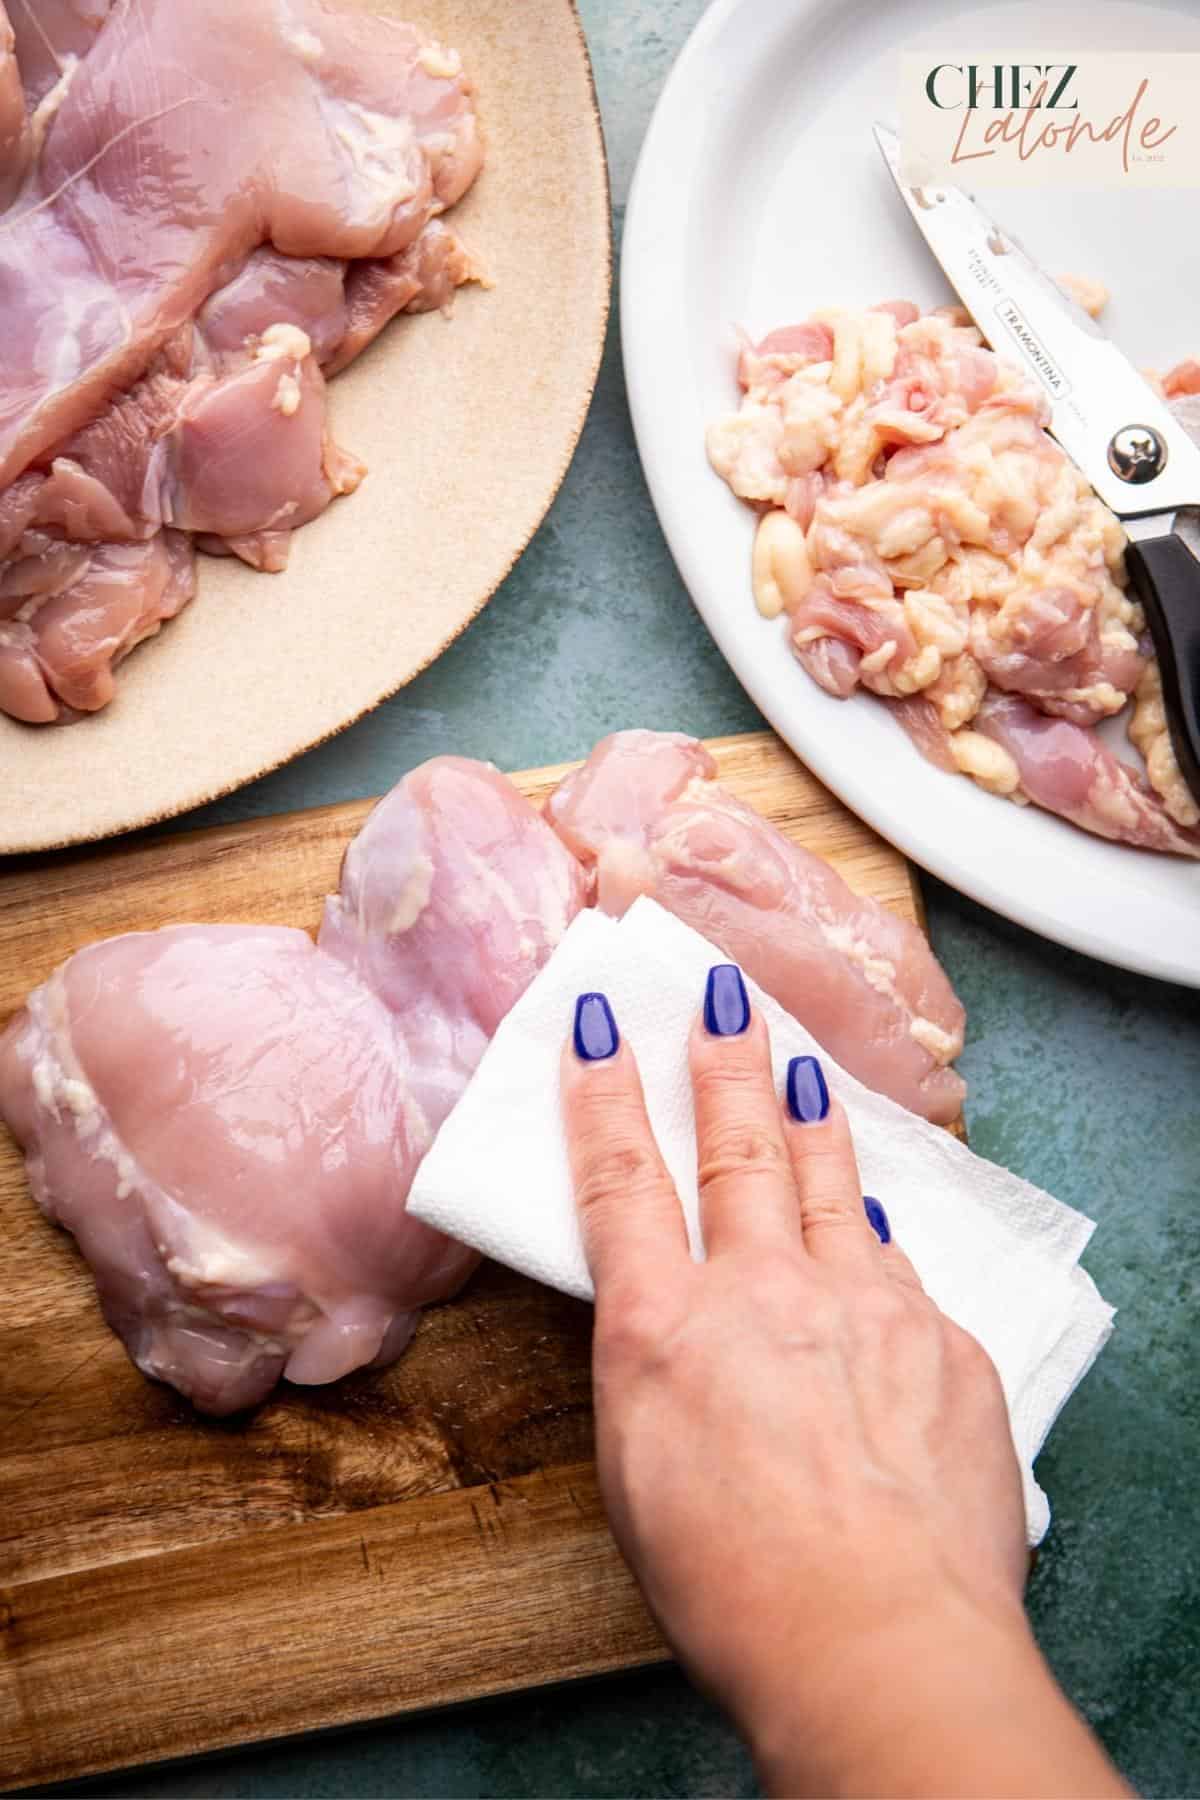 Wash the chicken thighs in water and pat dry with paper towels.